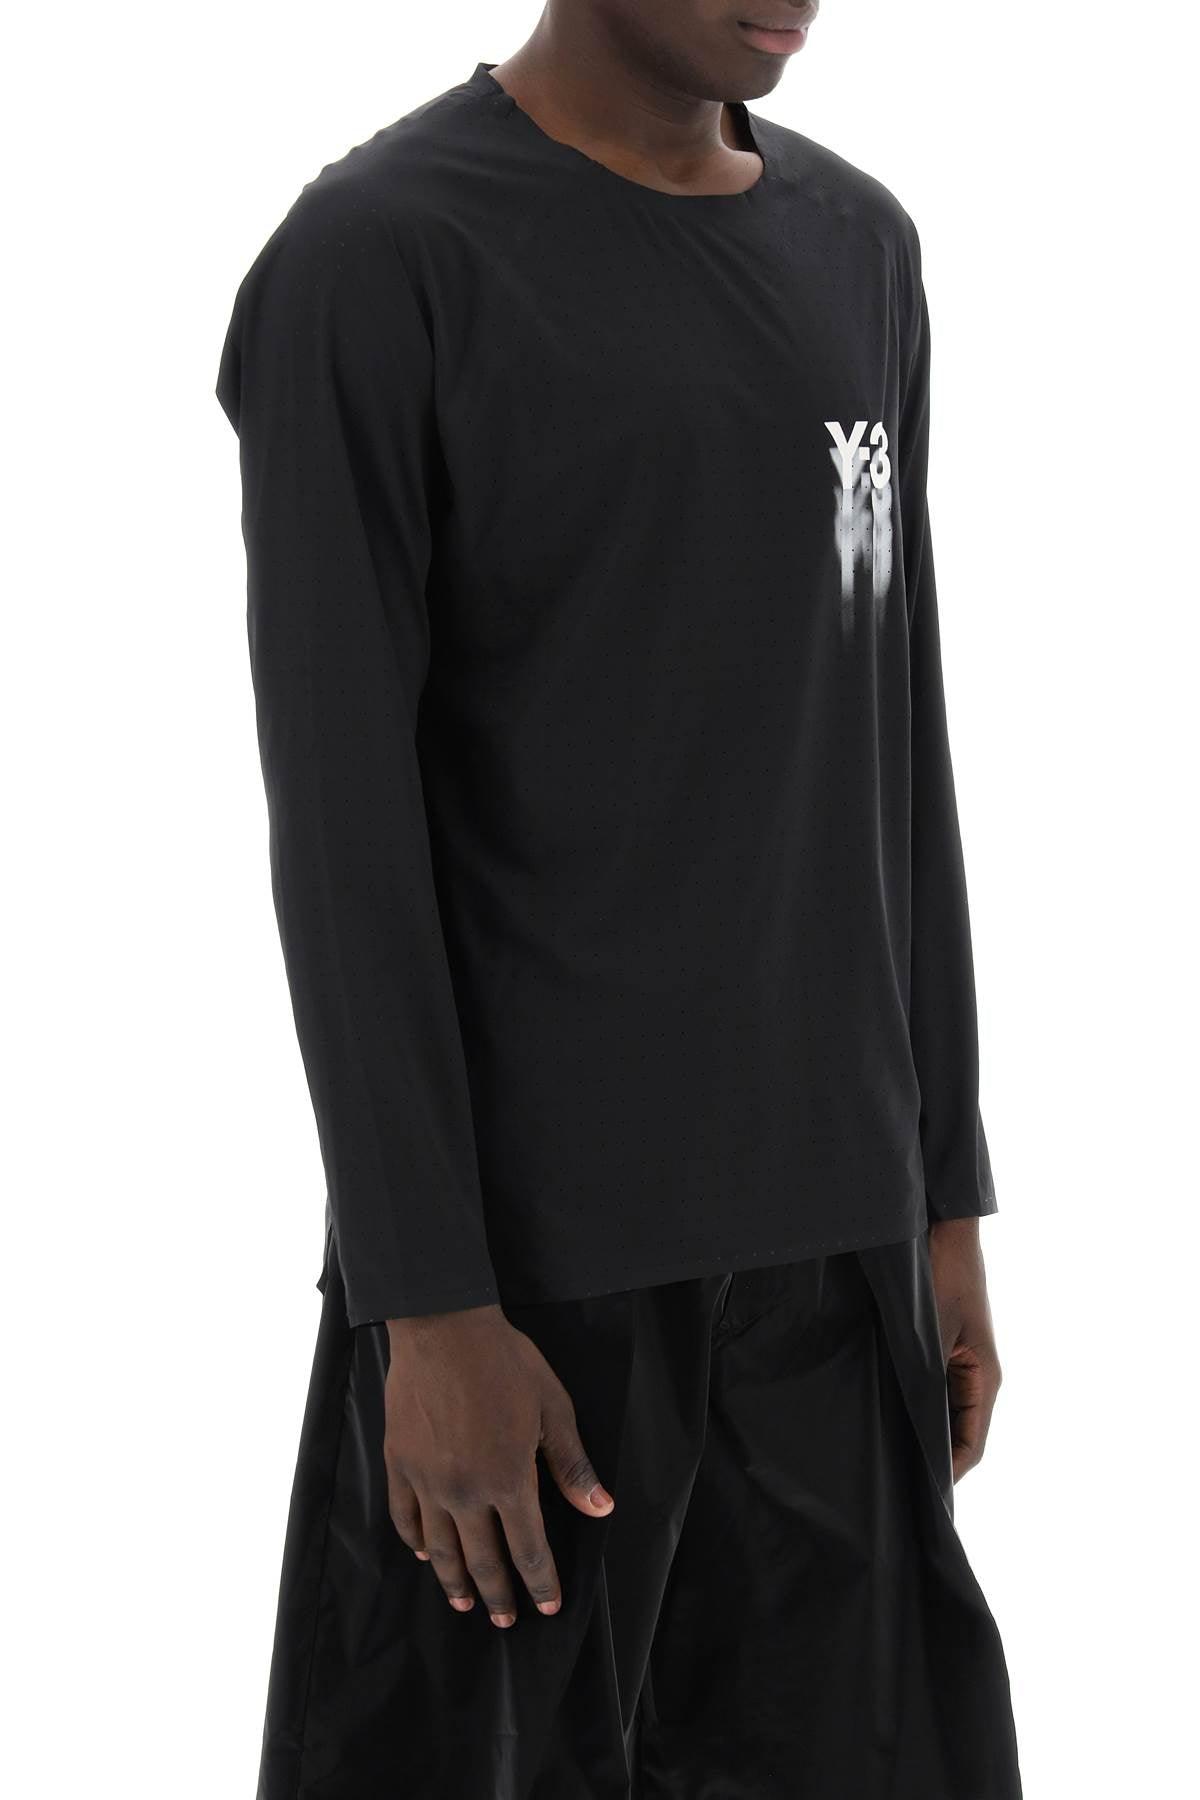 Y 3 Black Long-Sleeve Perforated Technical Jersey Top - JOHN JULIA